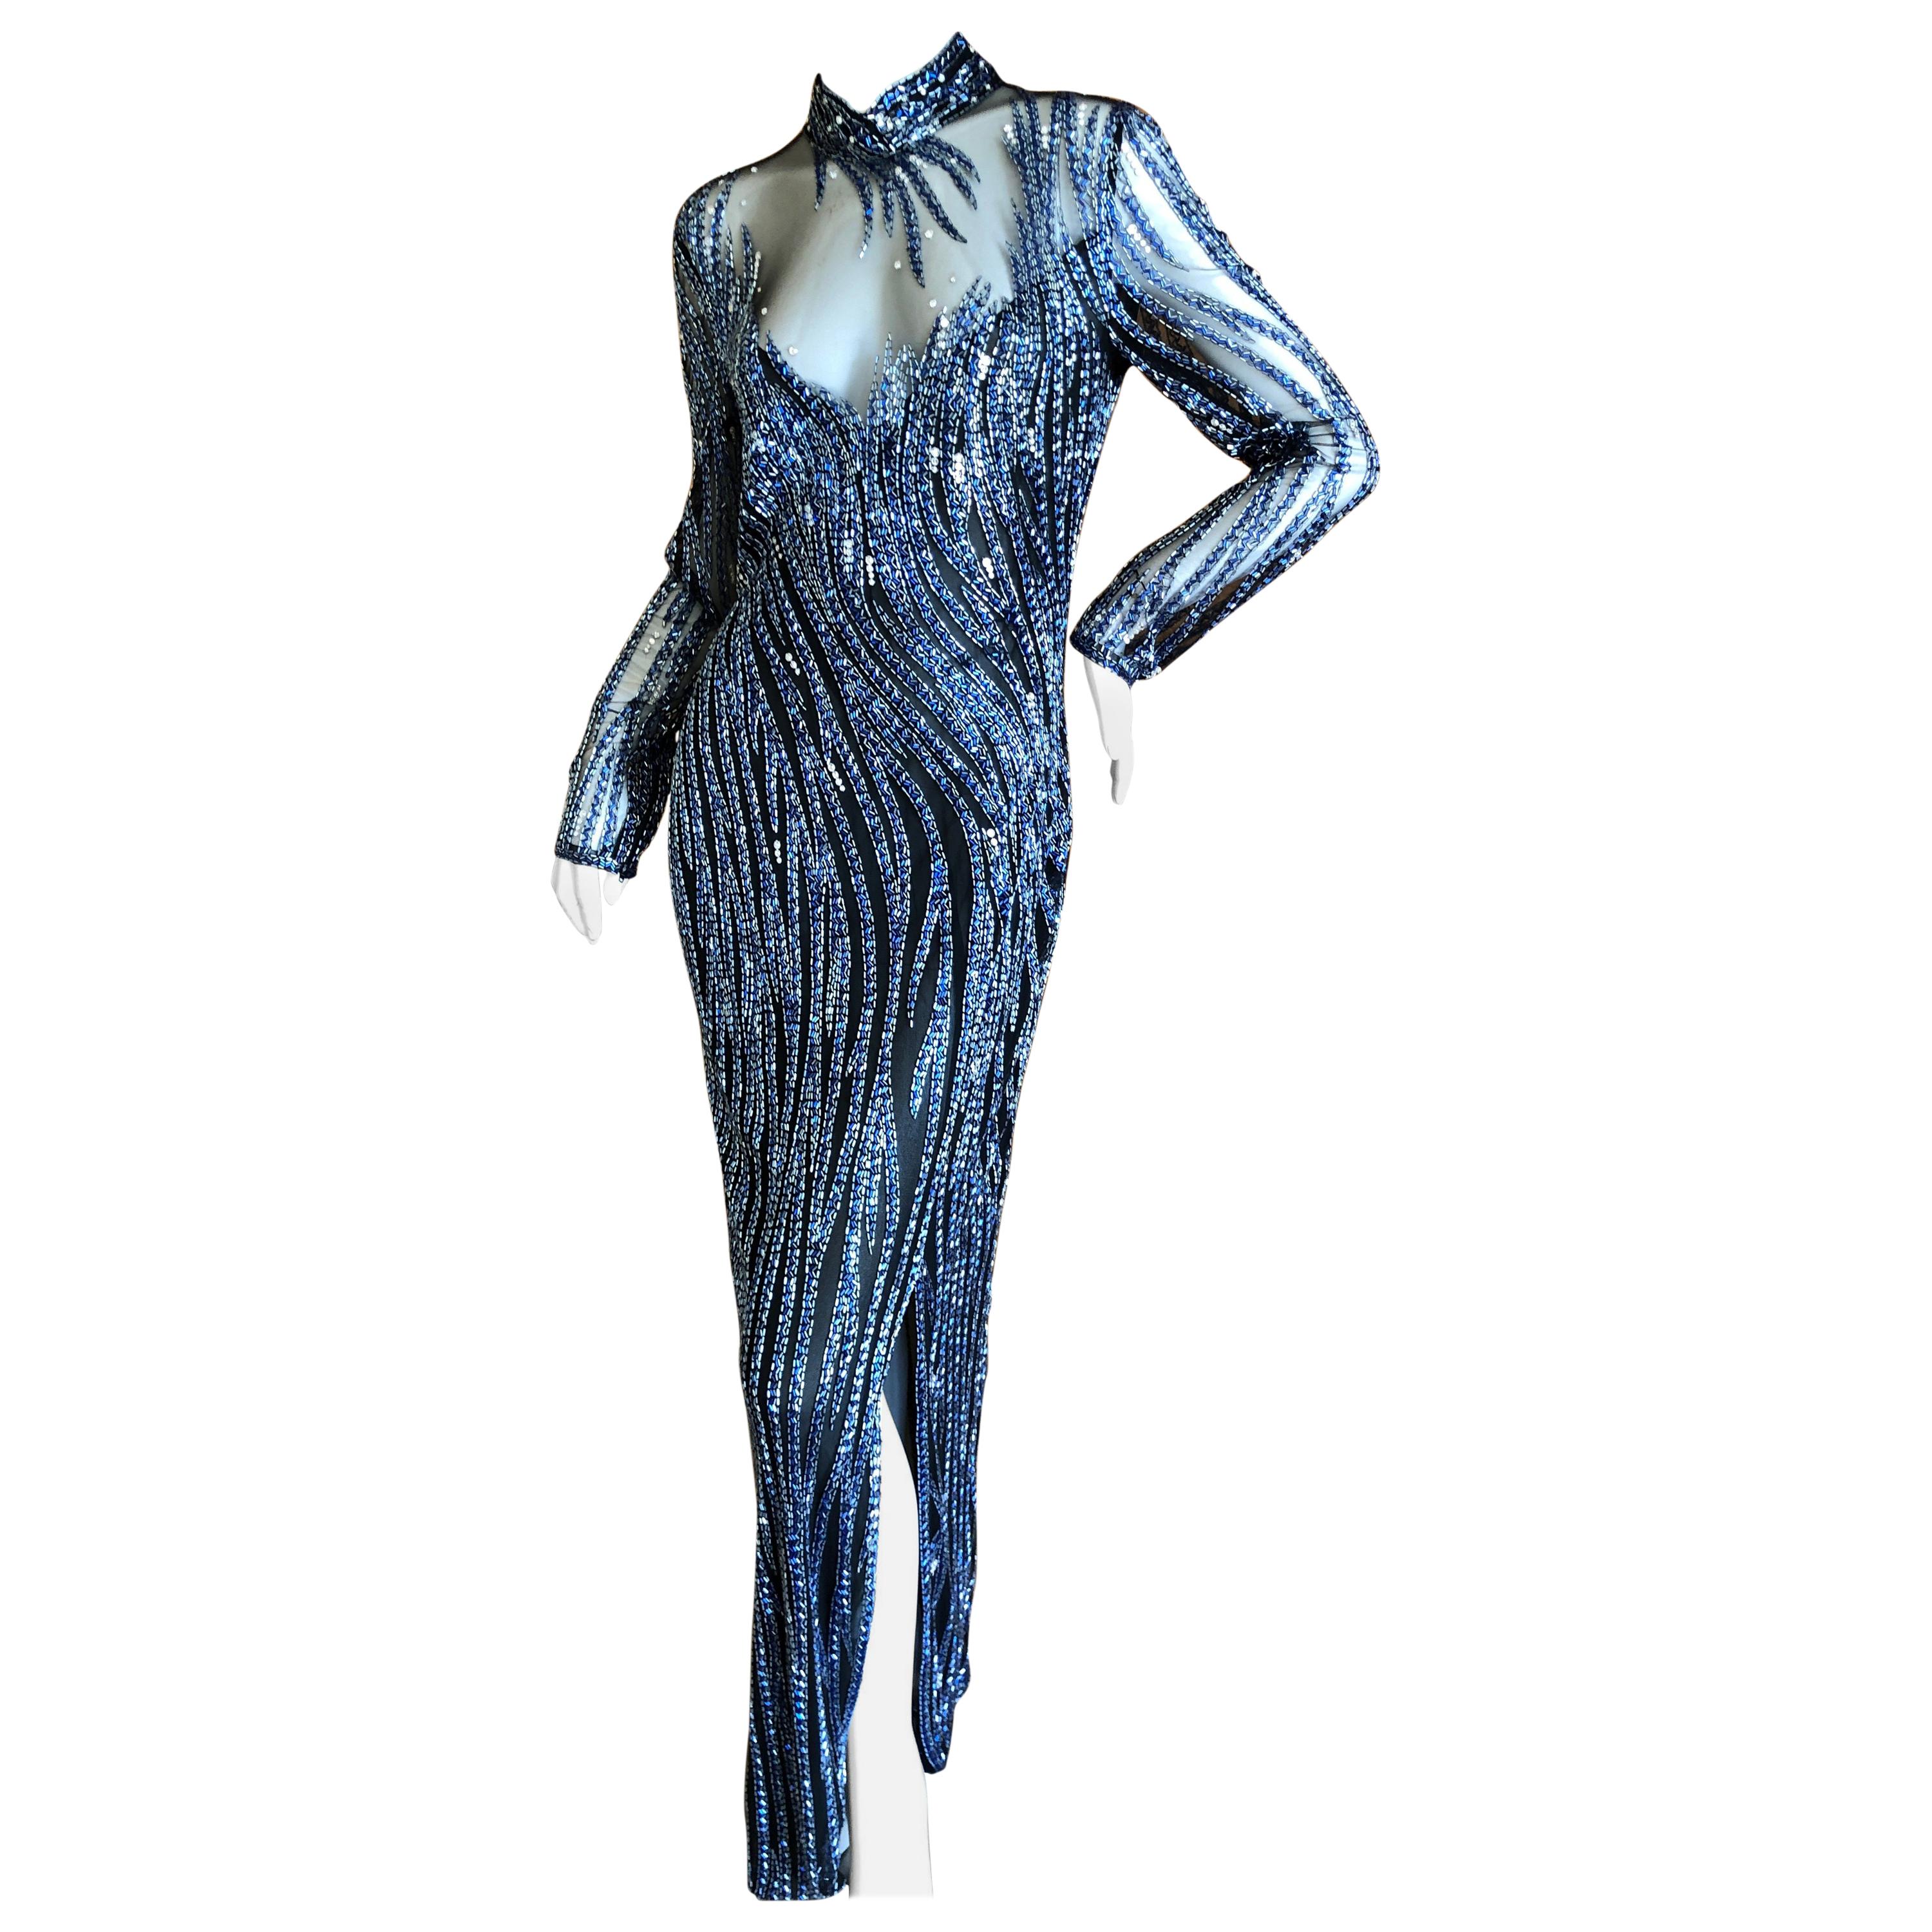 Bob Mackie Outstanding Vintage Sheer Illusion Bugle Beaded Evening Dress For Sale At 1stdibs 